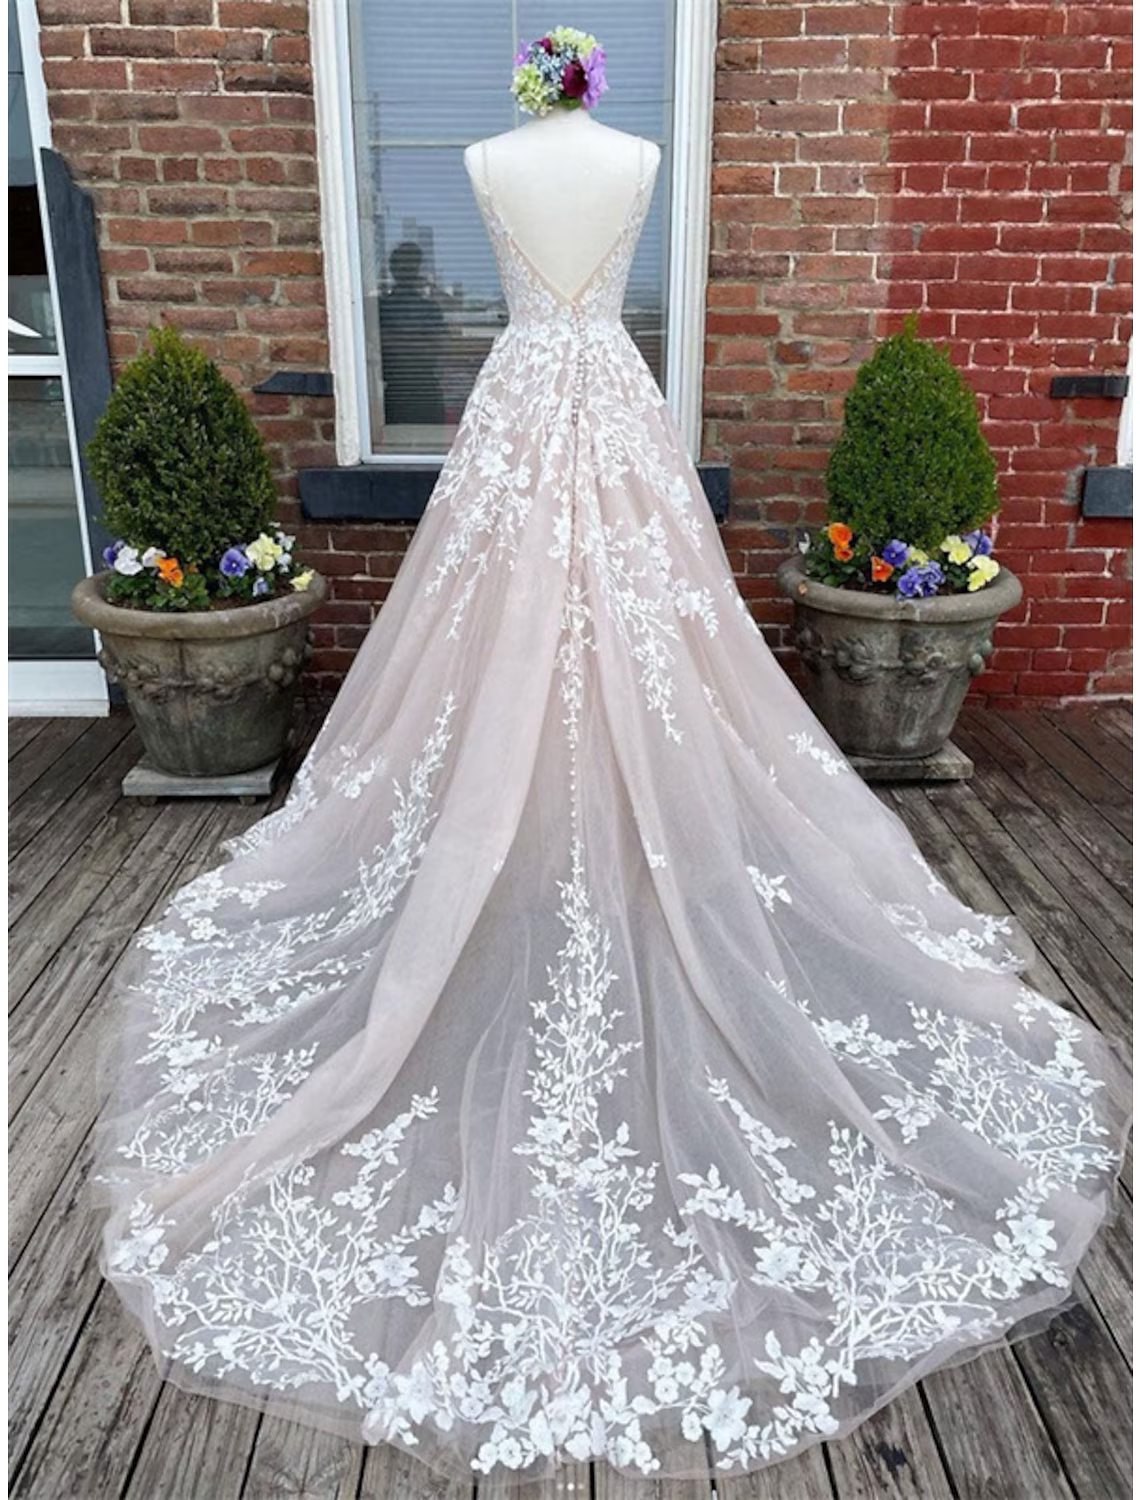 Engagement Wedding Dresses in Color Formal Wedding Dresses Chapel Train A-Line Sleeveless Strap Lace With Buttons Appliques